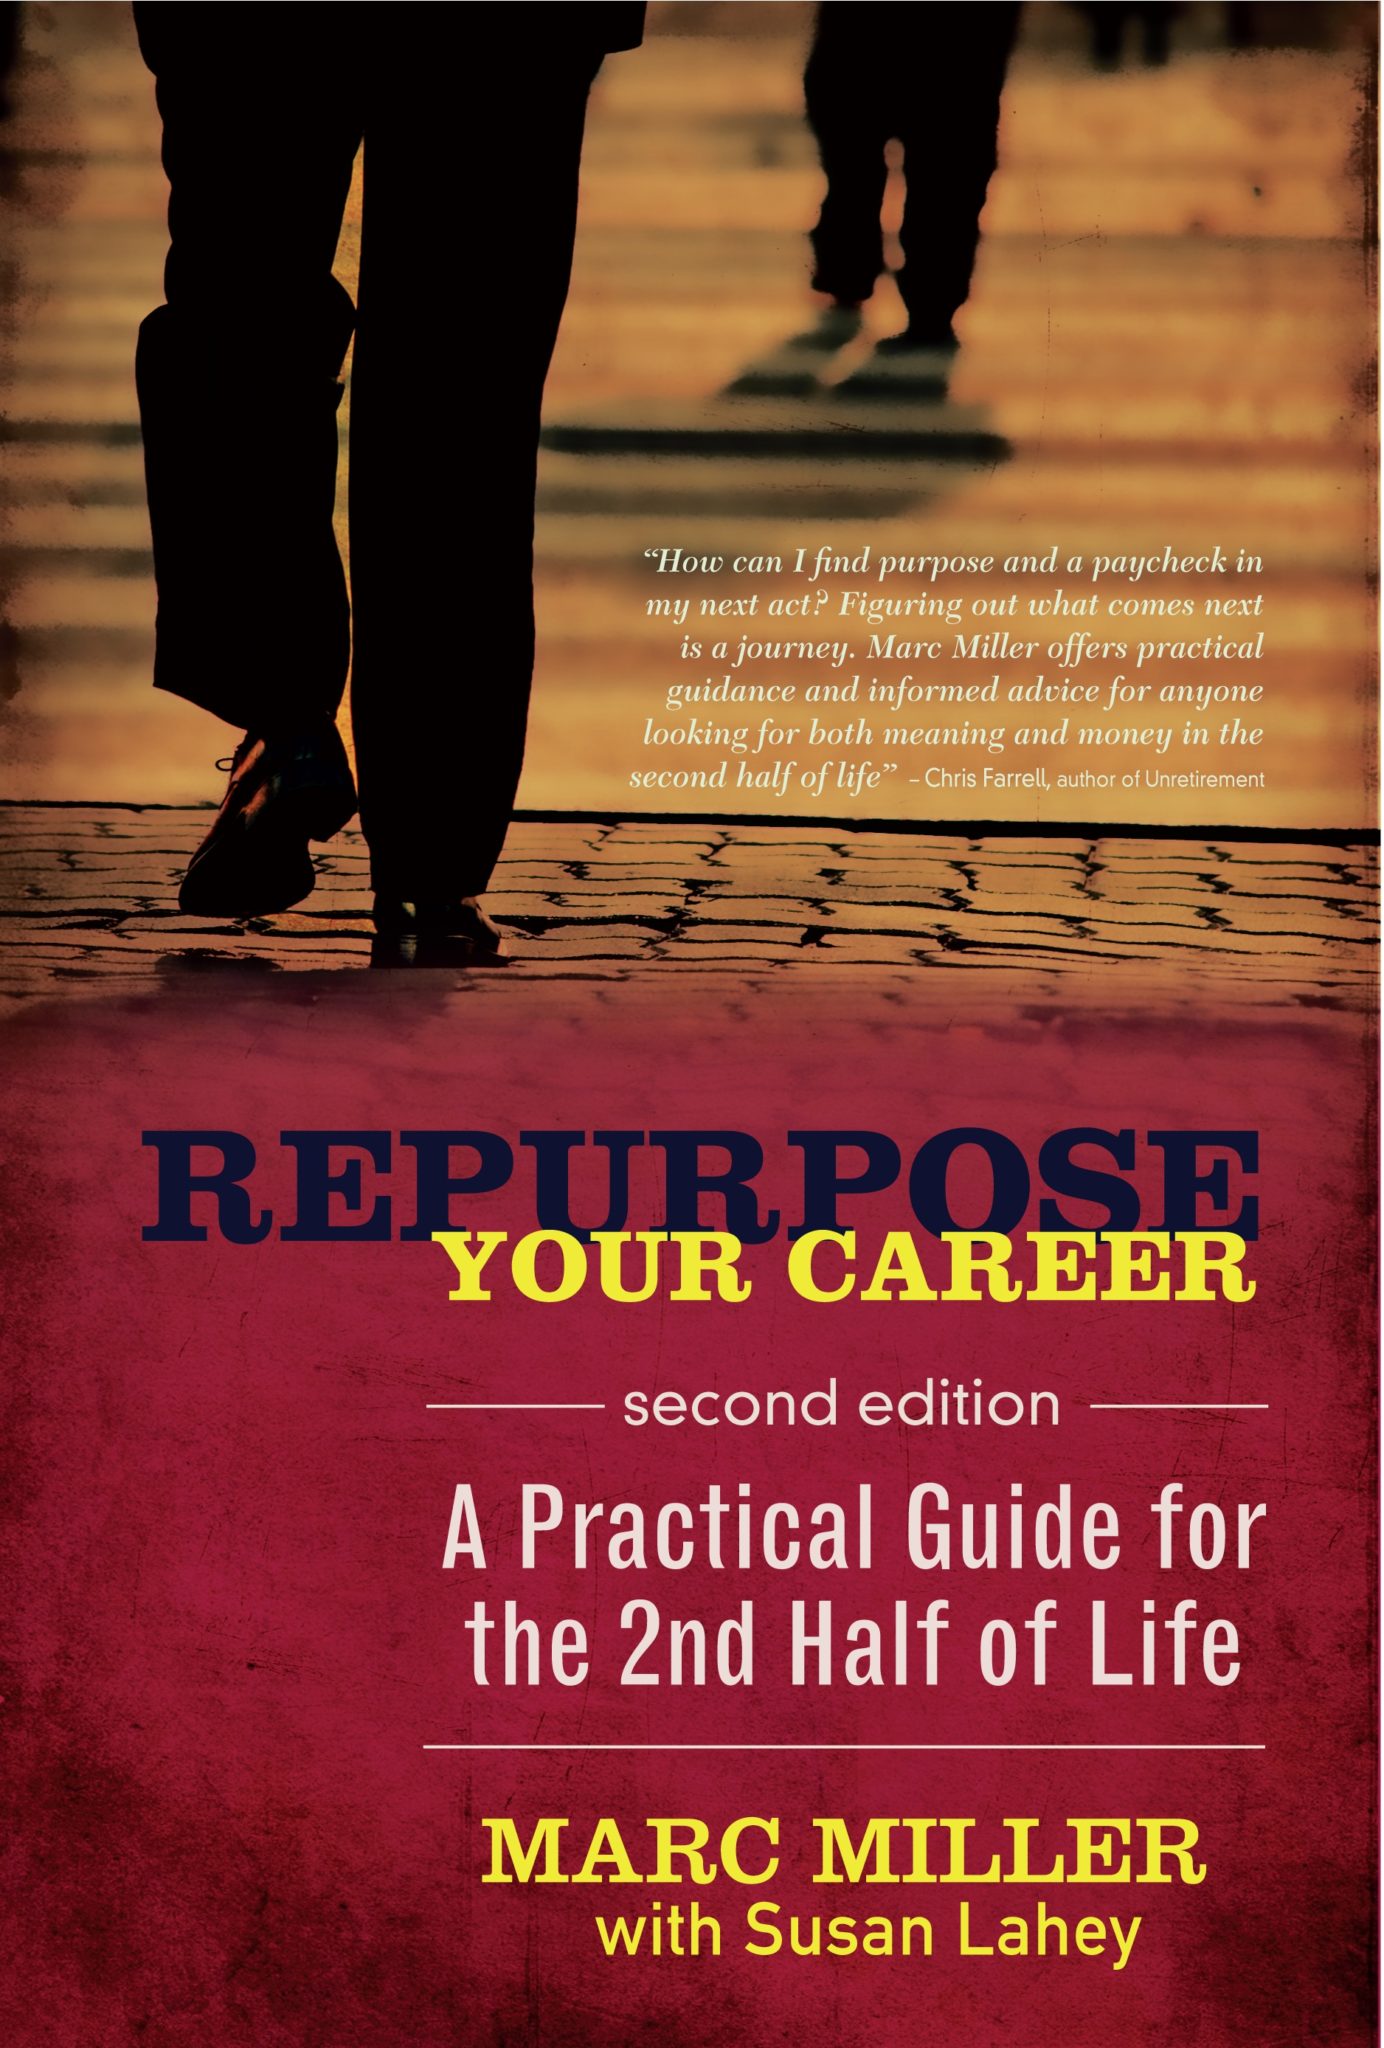 Repurpose Your Career A Practical Guide for the 2nd Half of Life
Epub-Ebook